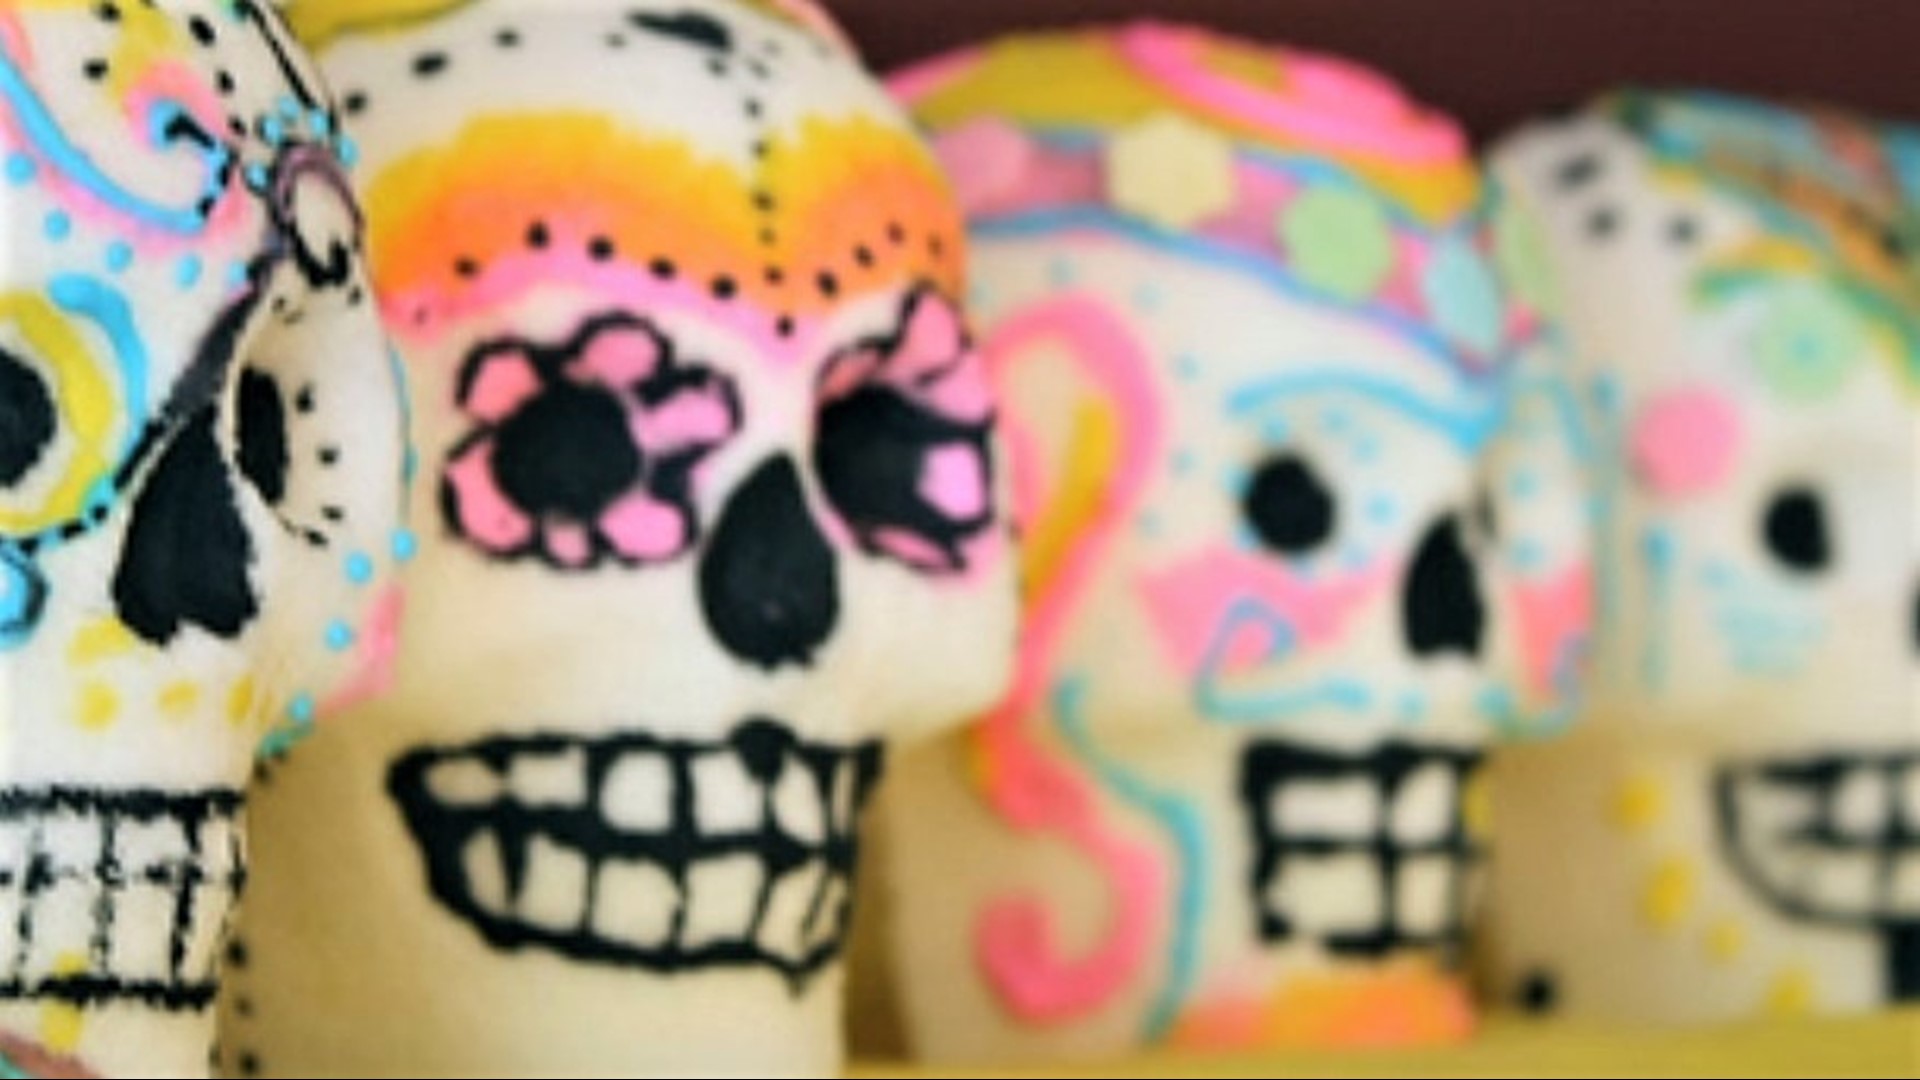 Artist Fara Arteaga shares the celebration of Dia de los Muertos, or Day of the Dead, and demonstrates how traditional sugar skulls are created.